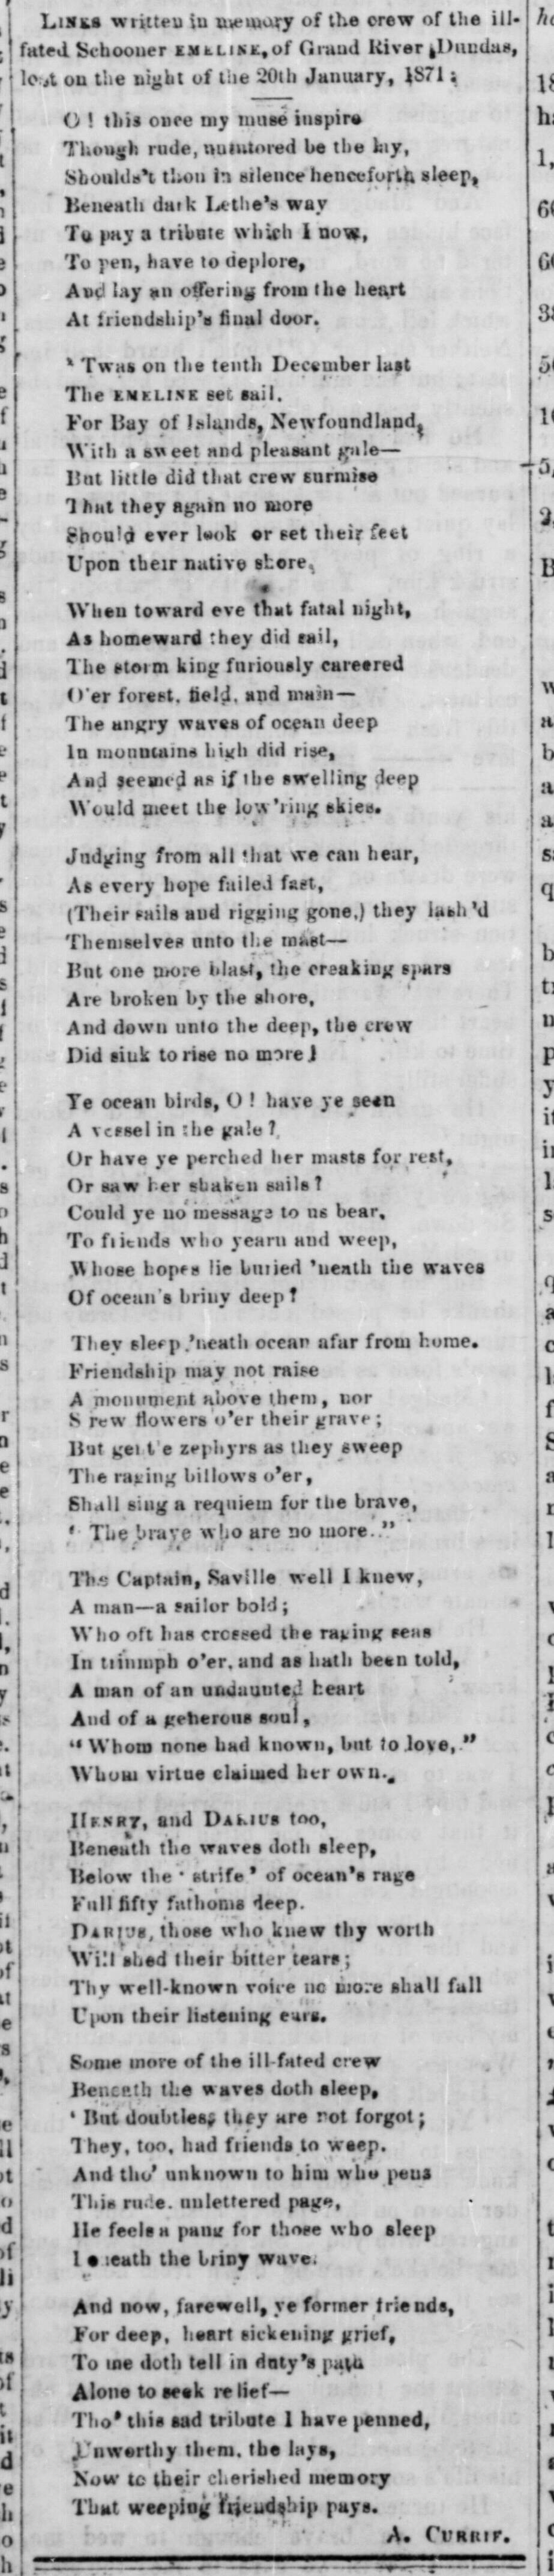 Scan from The Examiner, February 20, 1871, with a poem.